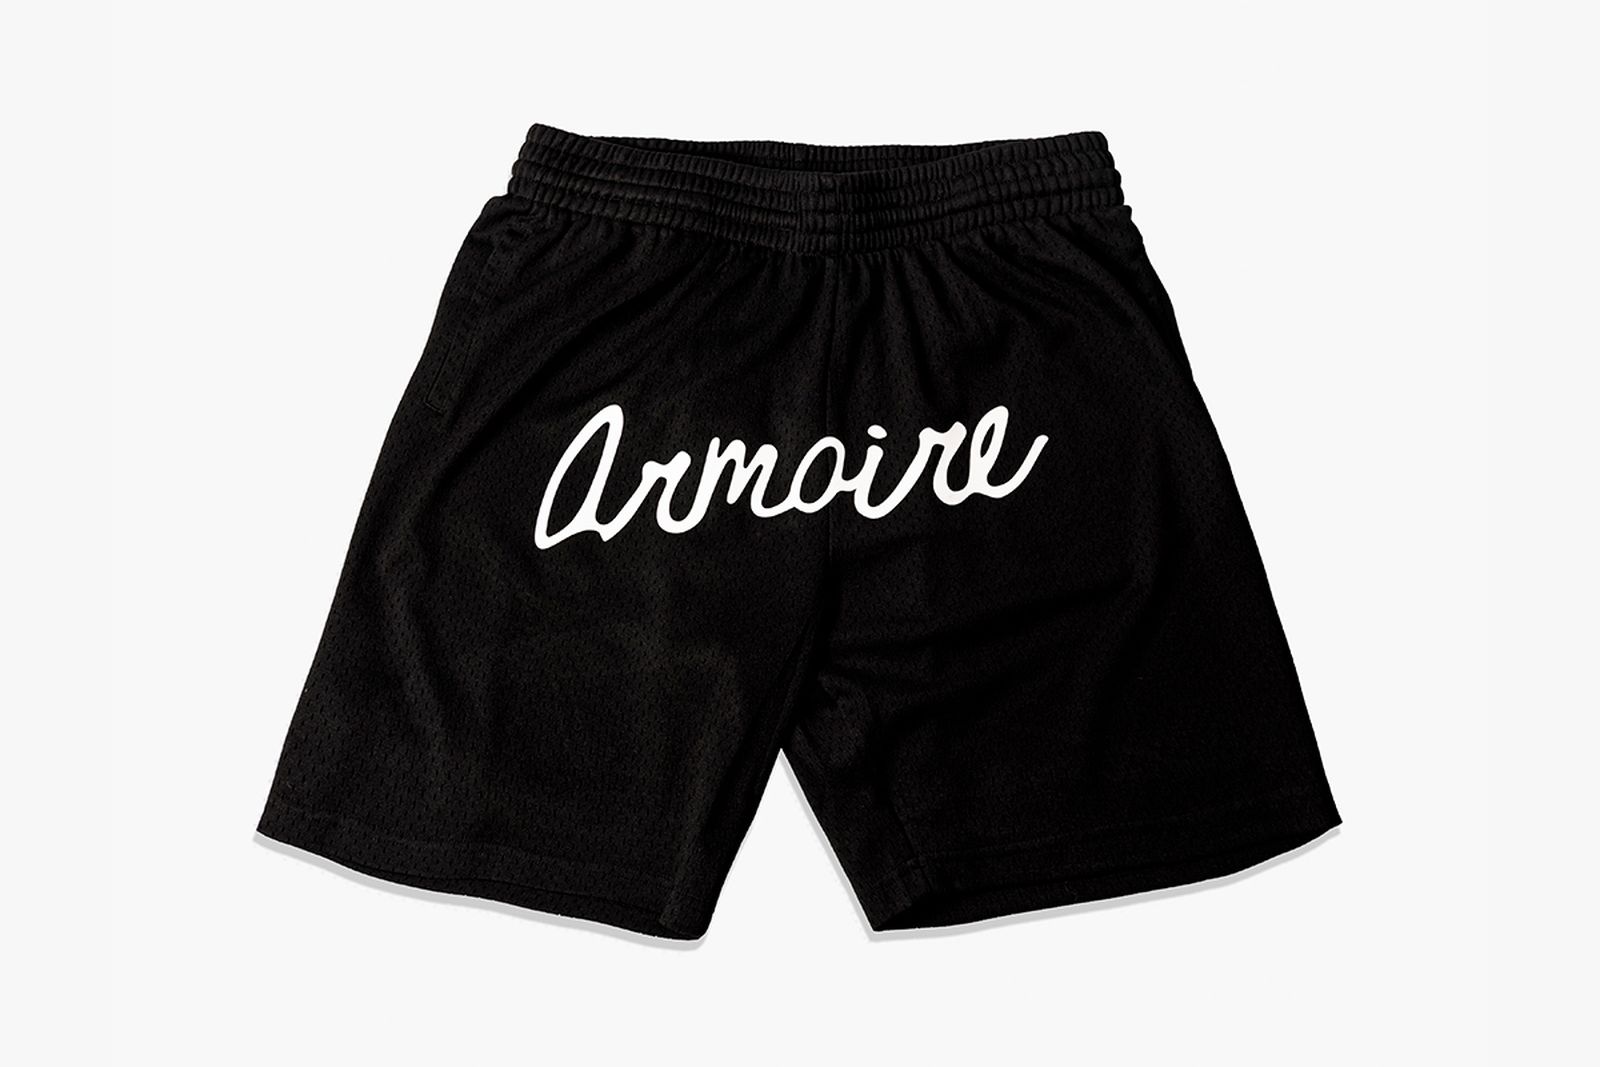 introducing-armoire-a-canadian-ideas-brand-06